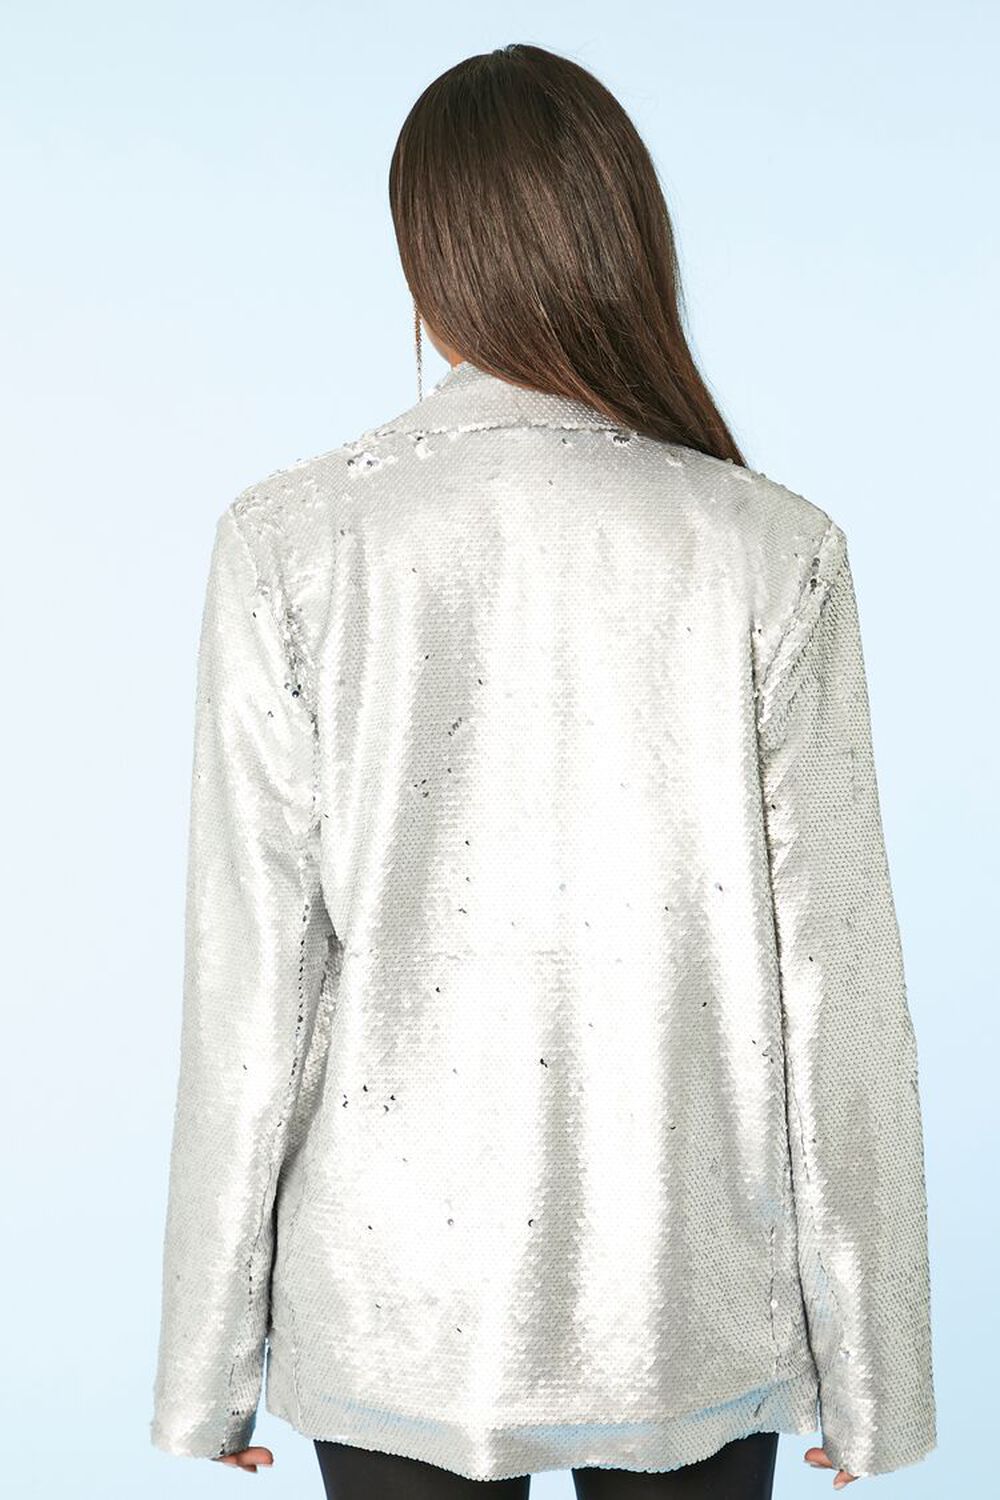 SILVER Sequin Notched Blazer, image 3